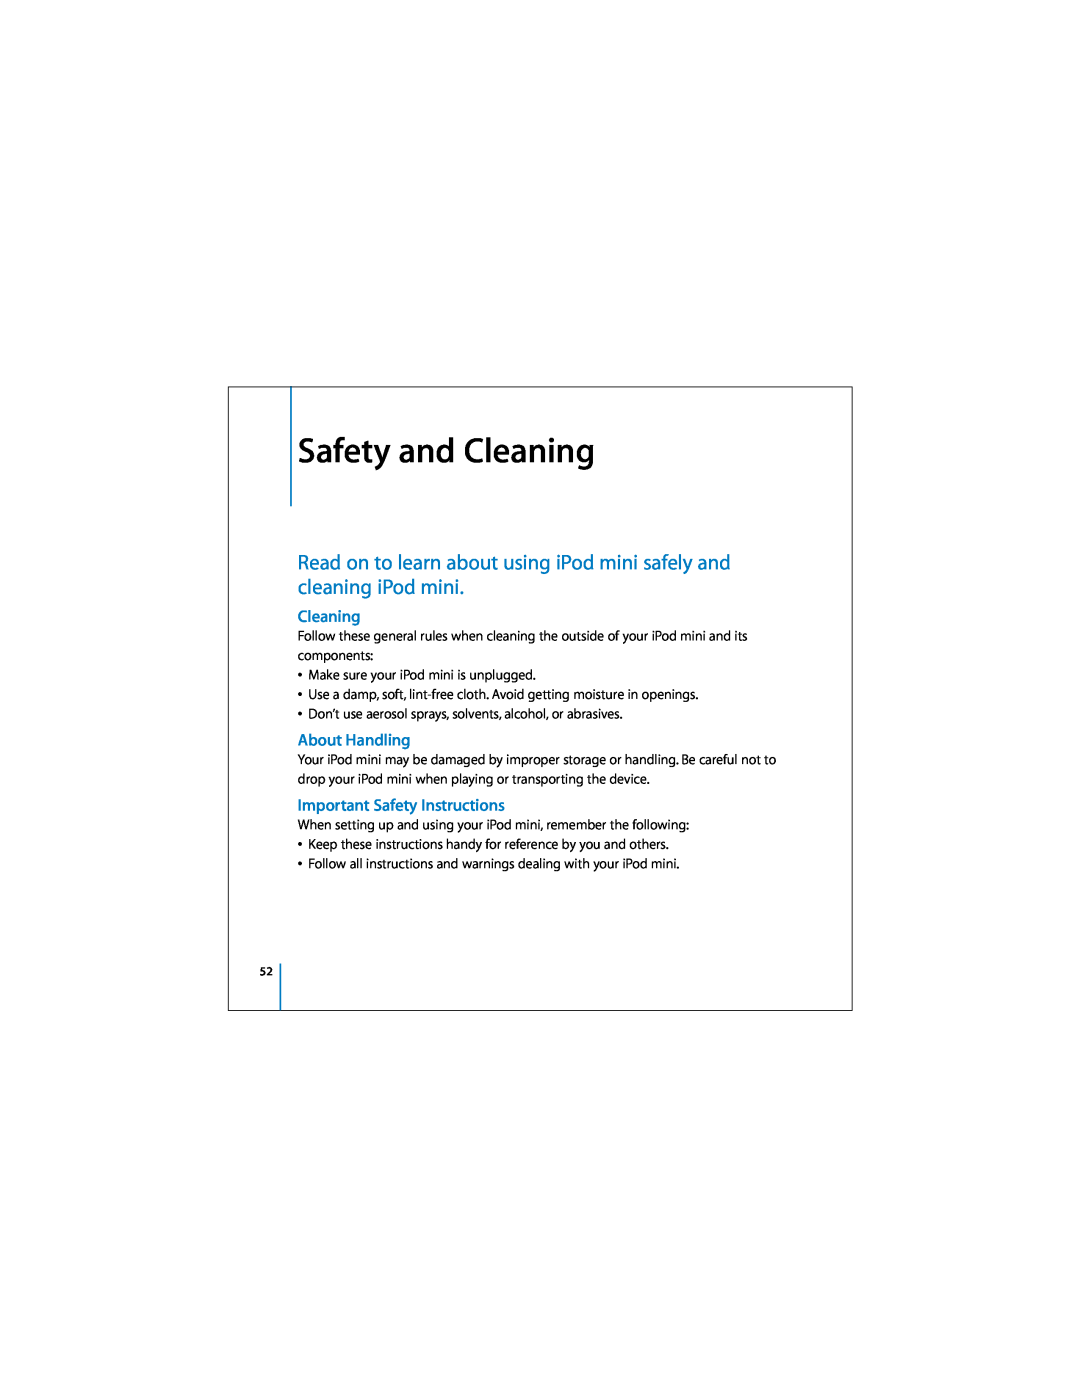 Apple M9805LL/A Safety and Cleaning, Read on to learn about using iPod mini safely and cleaning iPod mini, About Handling 